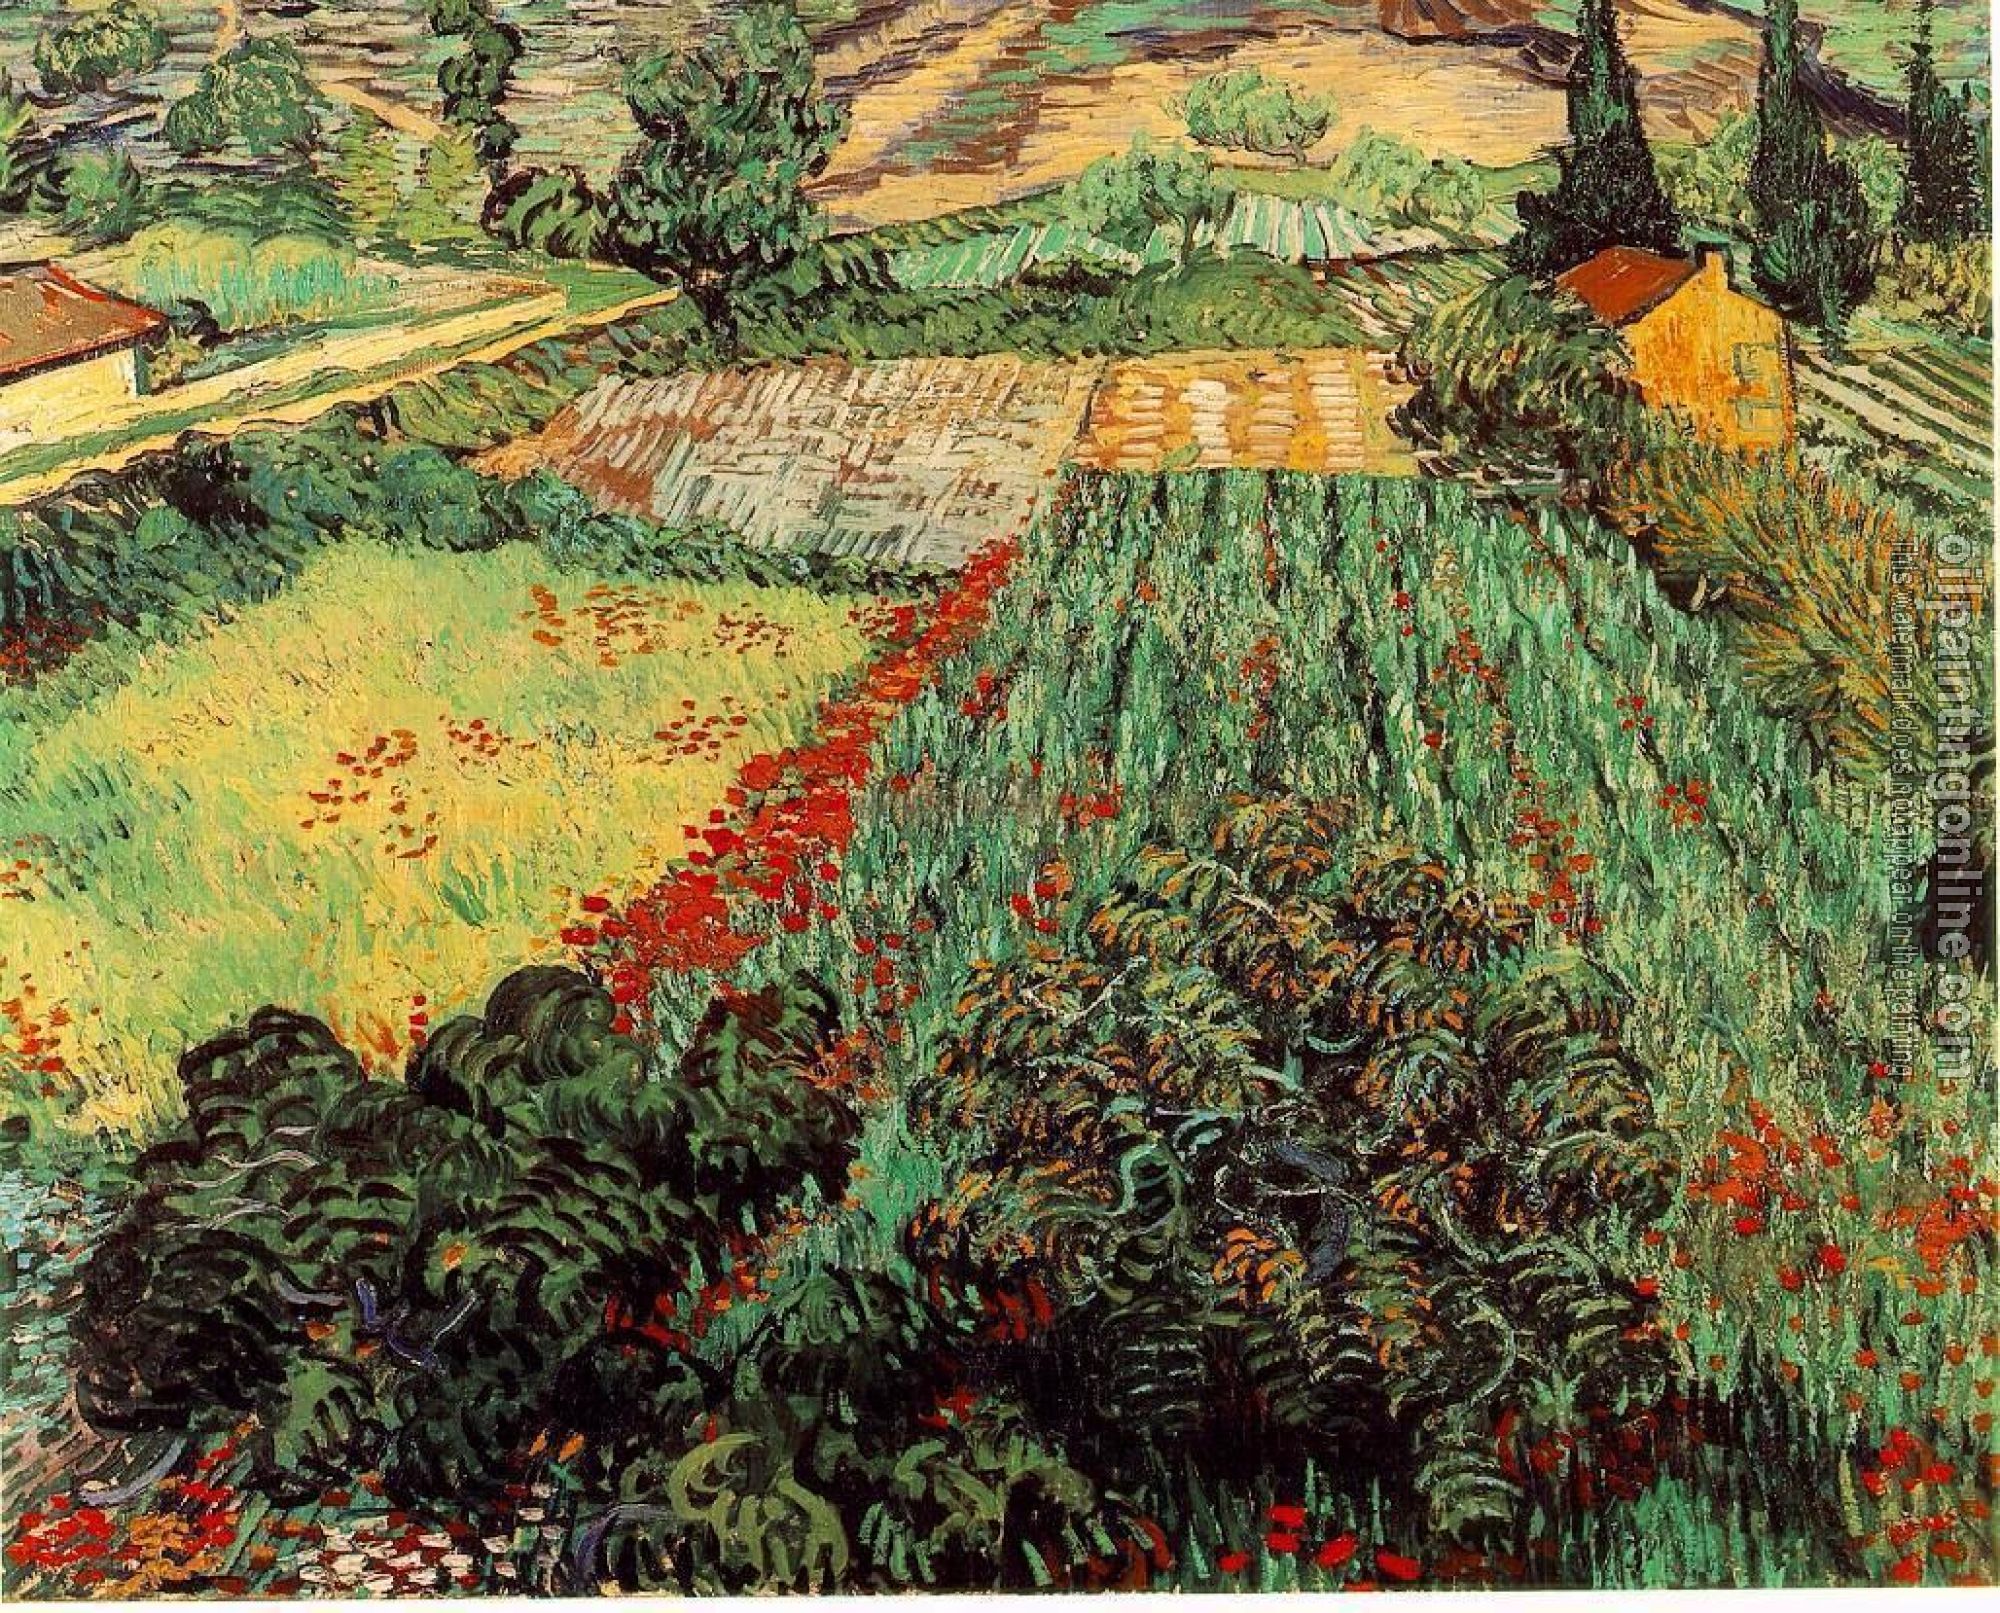 Gogh, Vincent van - Field with Poppies